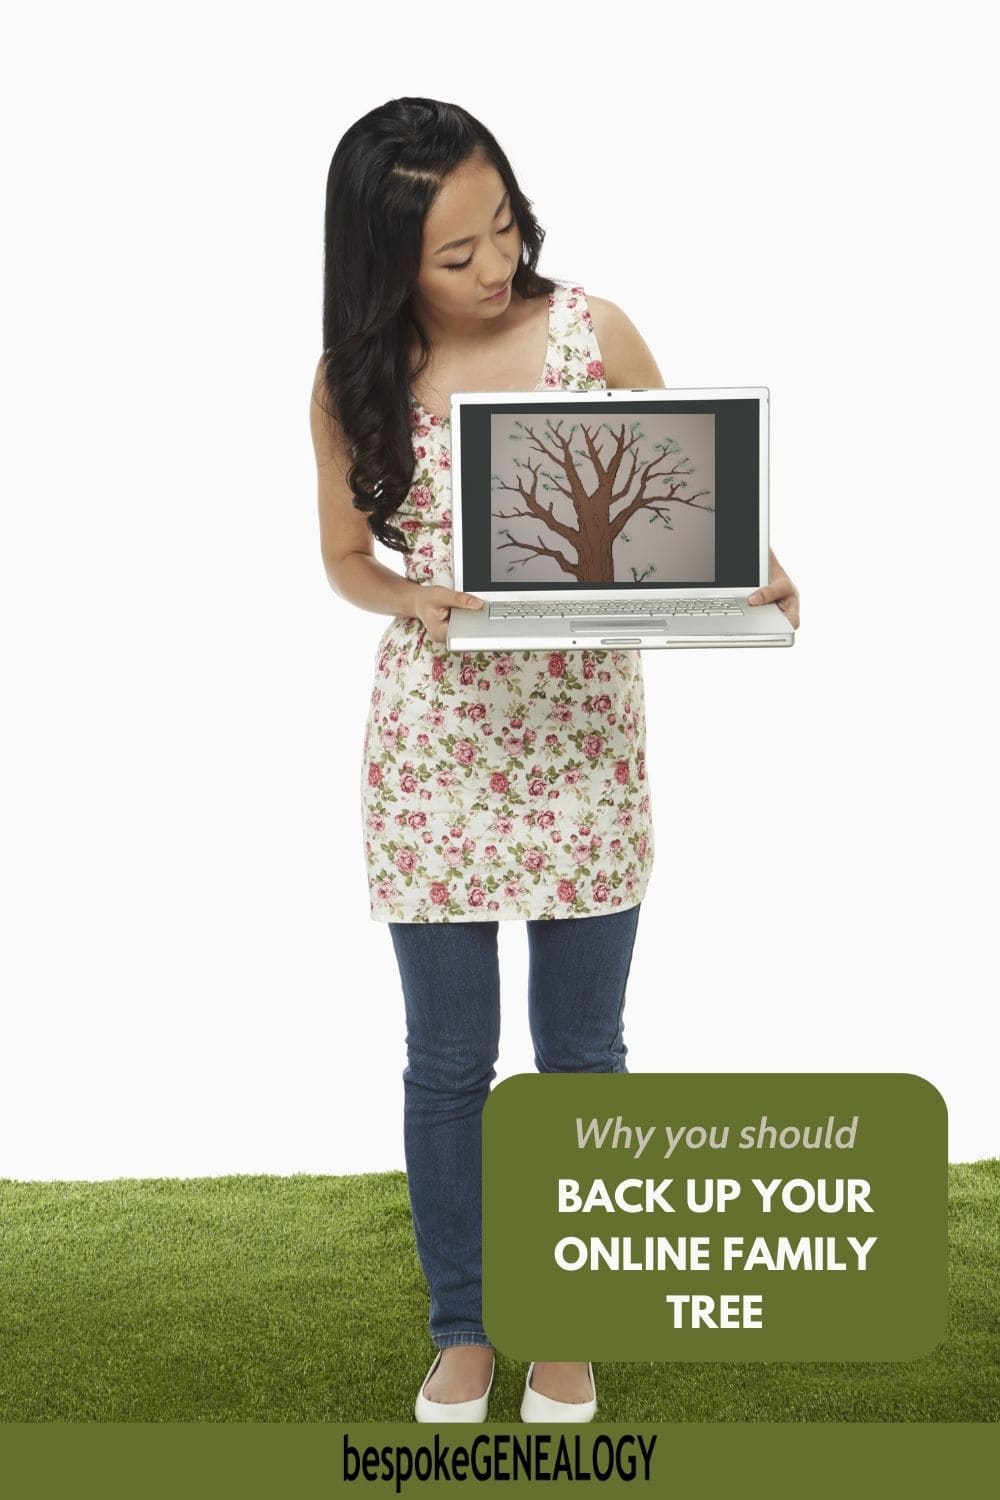 Why you should back up your online family tree. Photo of a young woman holding a laptop computer with a family tree on the screen.